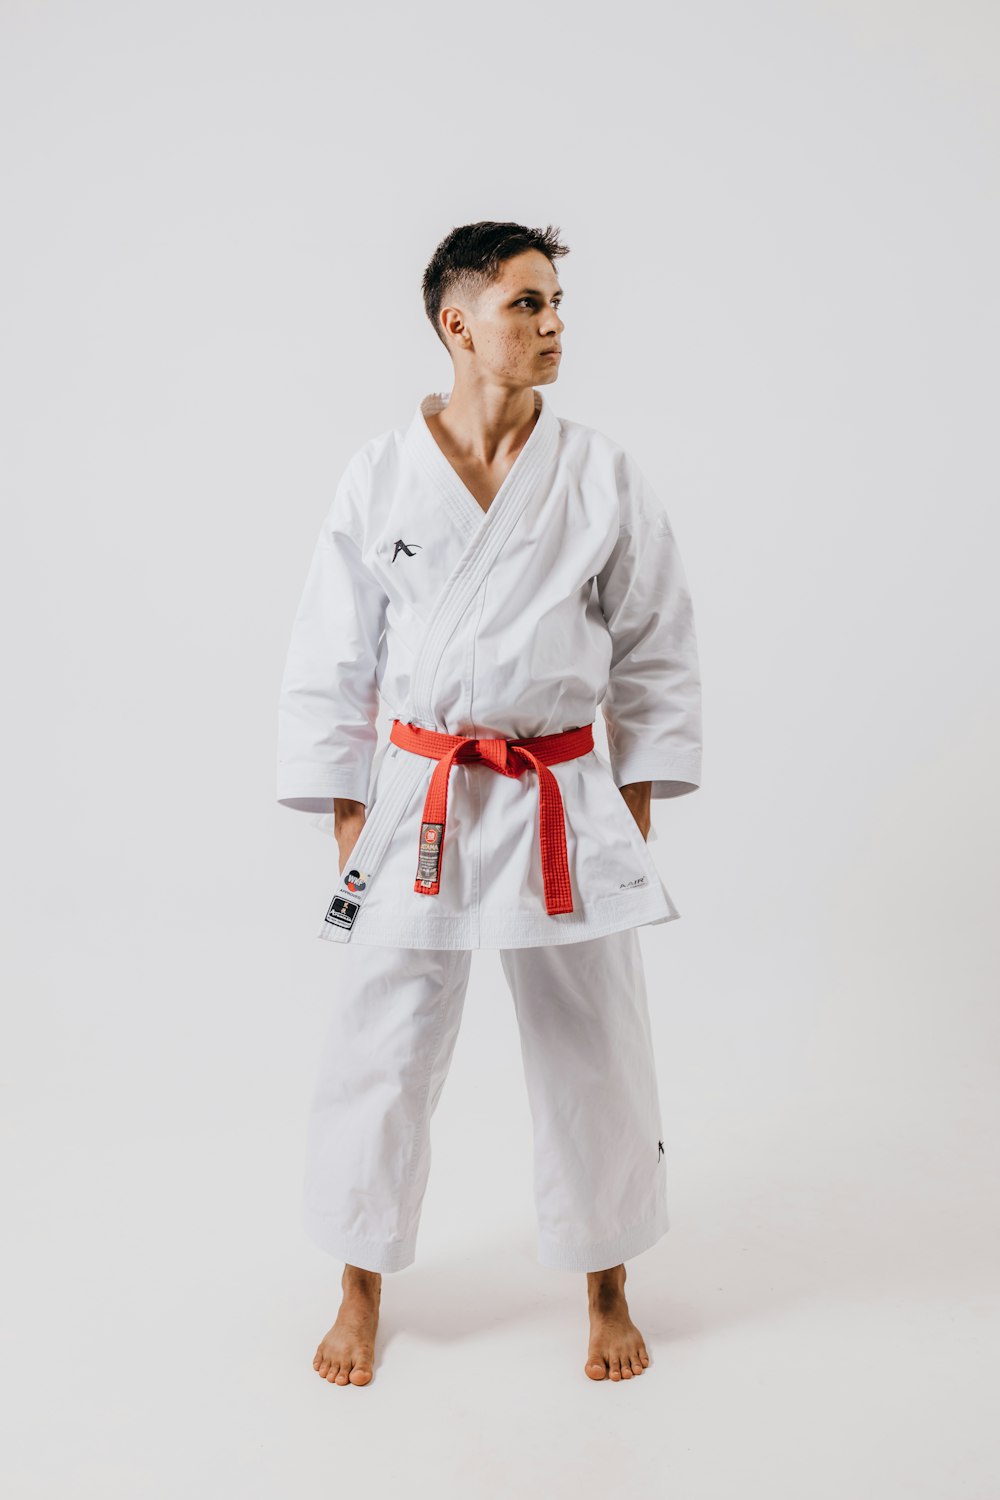 a man wearing a white karate suit and red belt